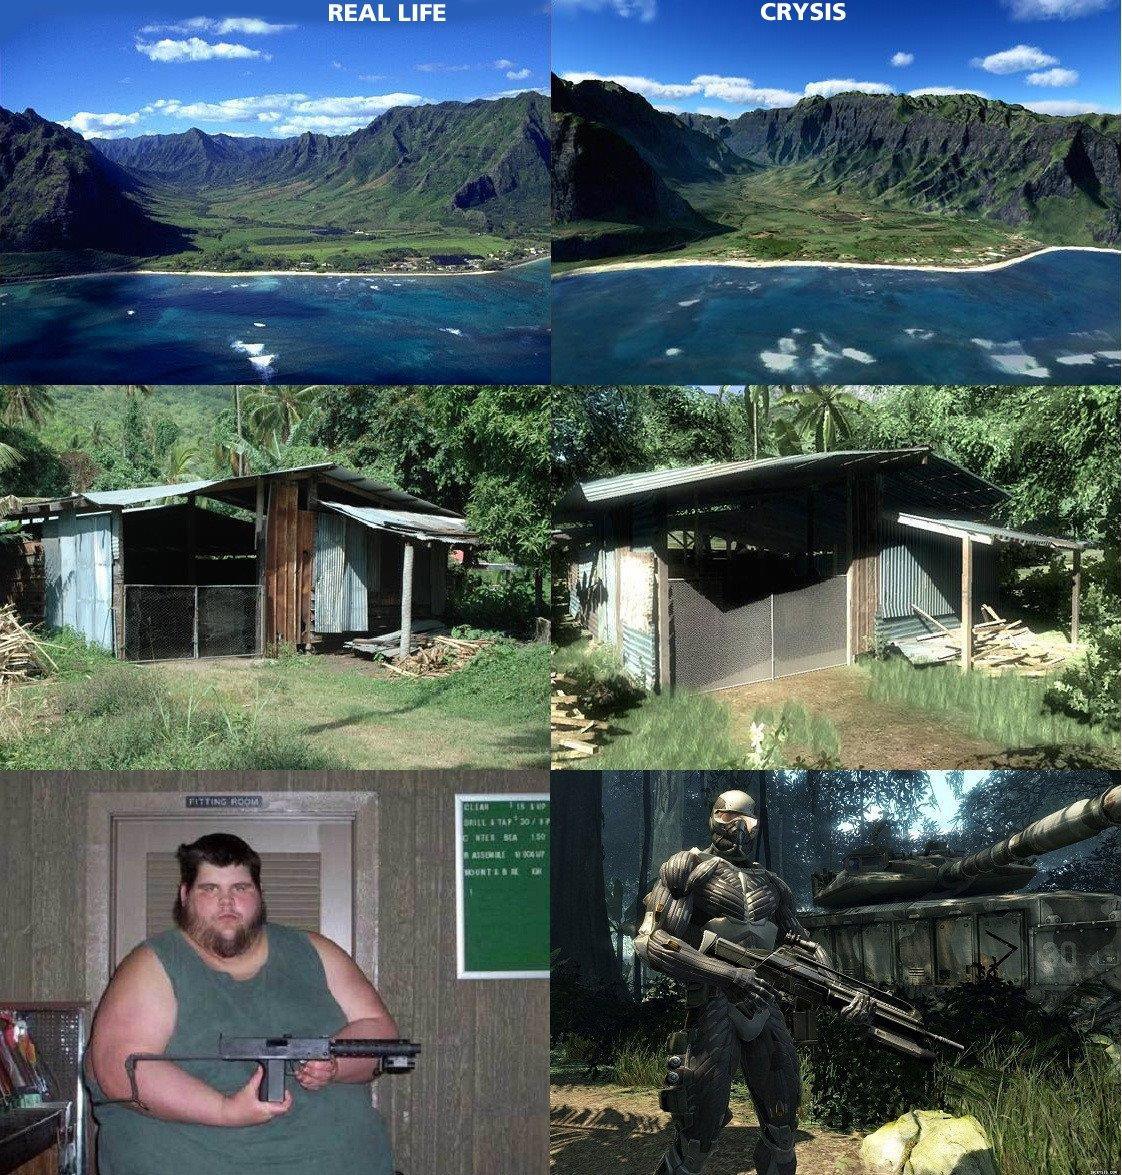 funny gaming memes - video game graphics vs real life - Real Life Crysis 34.0 Ning Room Olian 0 Lill 4 Tay 617 Dwel Be 135 Aisi Kw Boortere